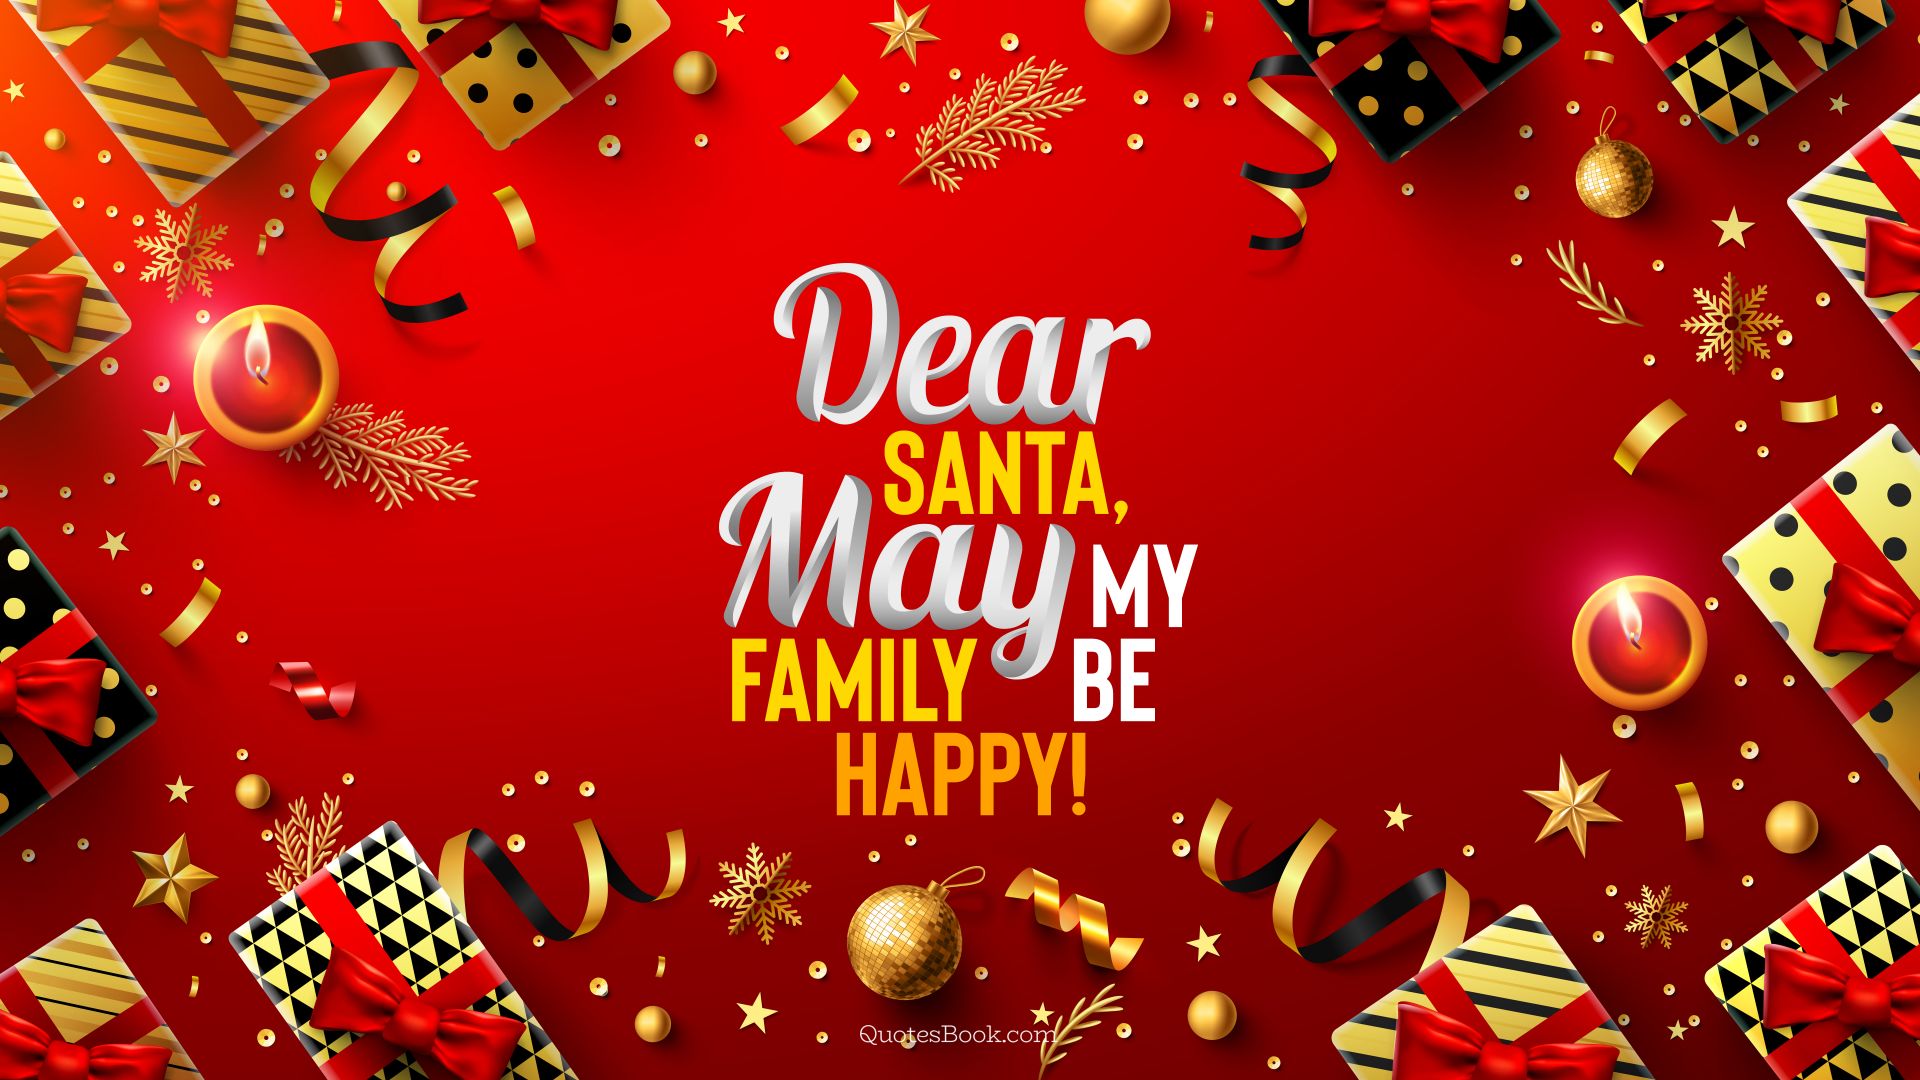 Dear Santa, may my family be happy!. - Quote by QuotesBook